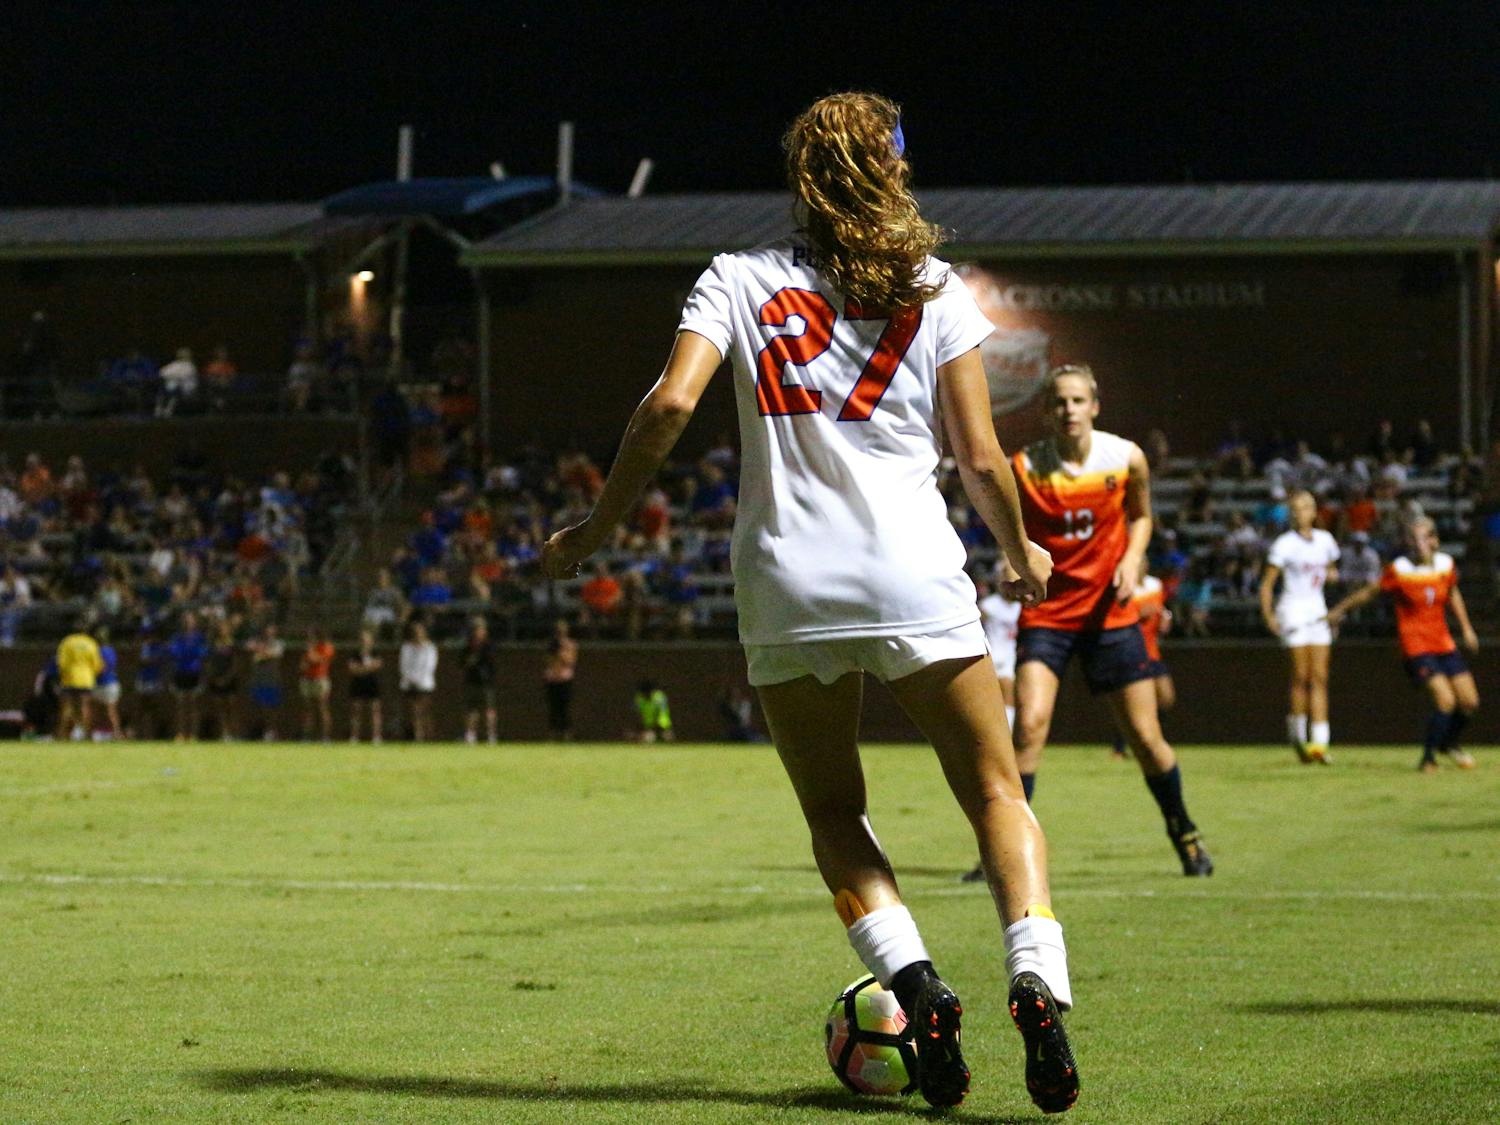 Mayra Pelayo runs with the ball during Florida's 2-1 win against Syracuse on August 27, 2017, at Donald R. Dizney Stadium.